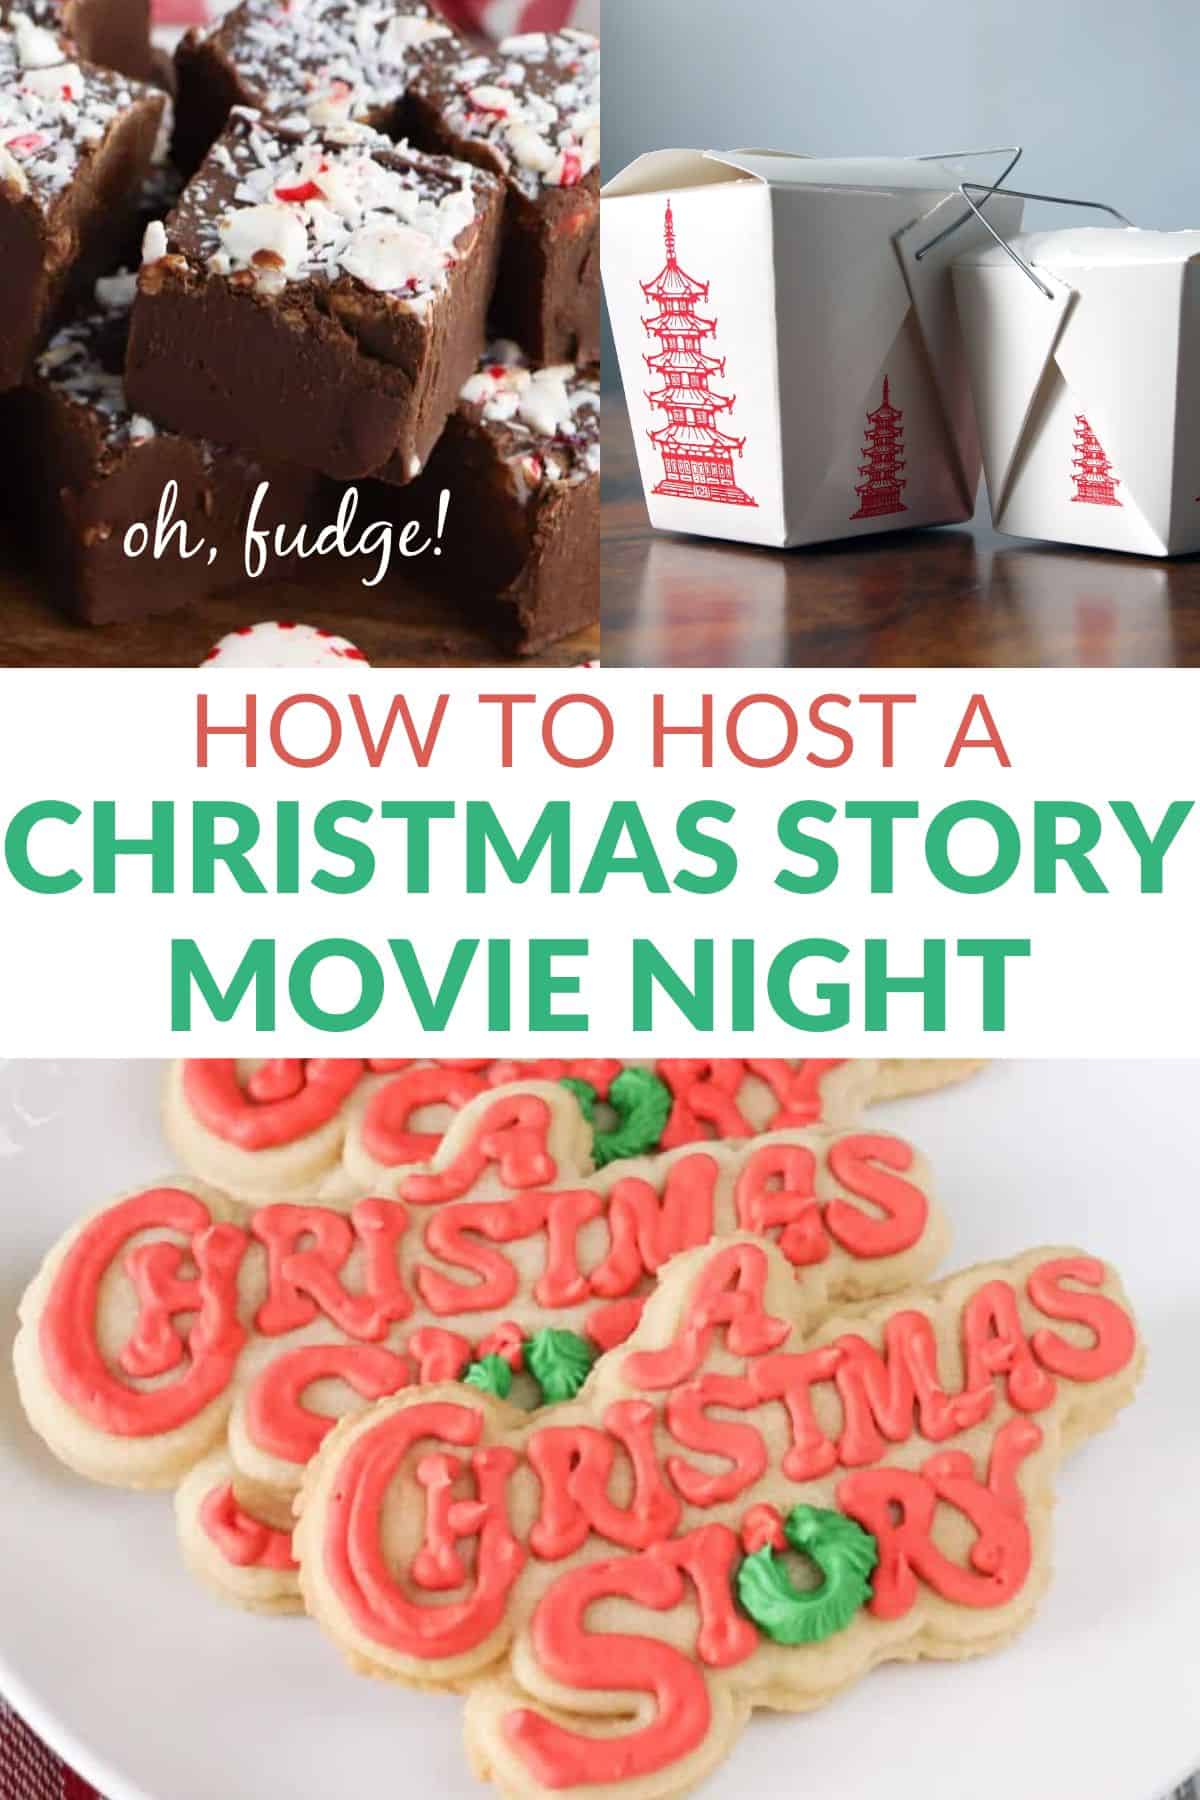 collage of fudge, Chinese food boxes, and cookies - text overlay in the middle says how to host a Christmas story movie night